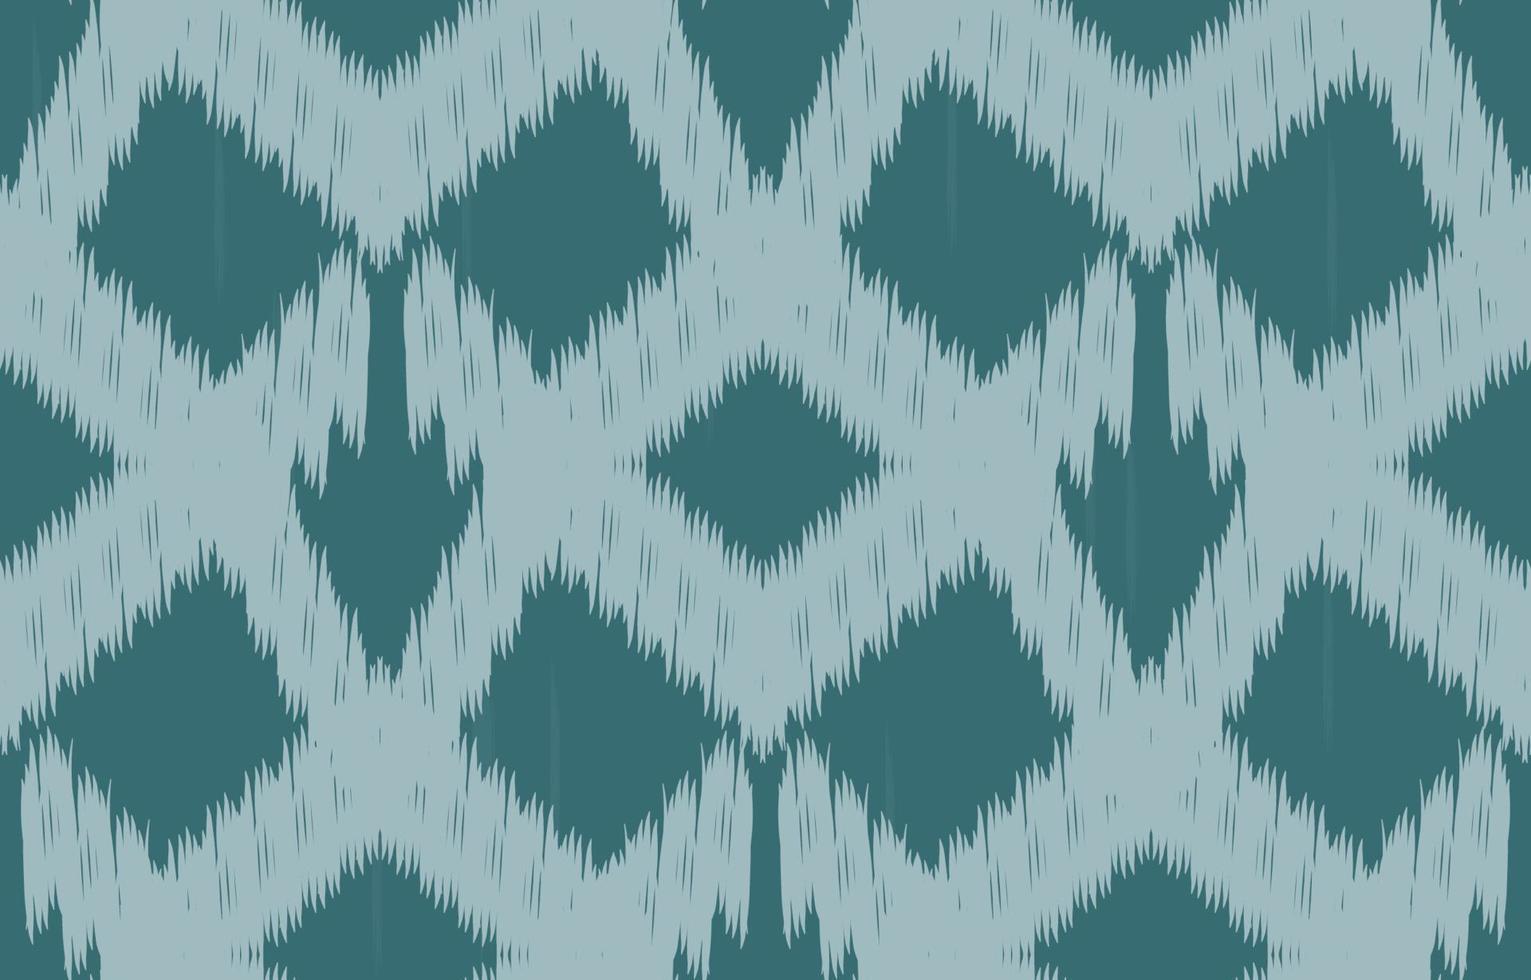 blue ikat fabric seamless pattern Geometric ethnic oriental  traditional embroidery style.Design for background,carpet,mat,wallpaper,clothing,wrapping,Batik,Vector illustration. vector